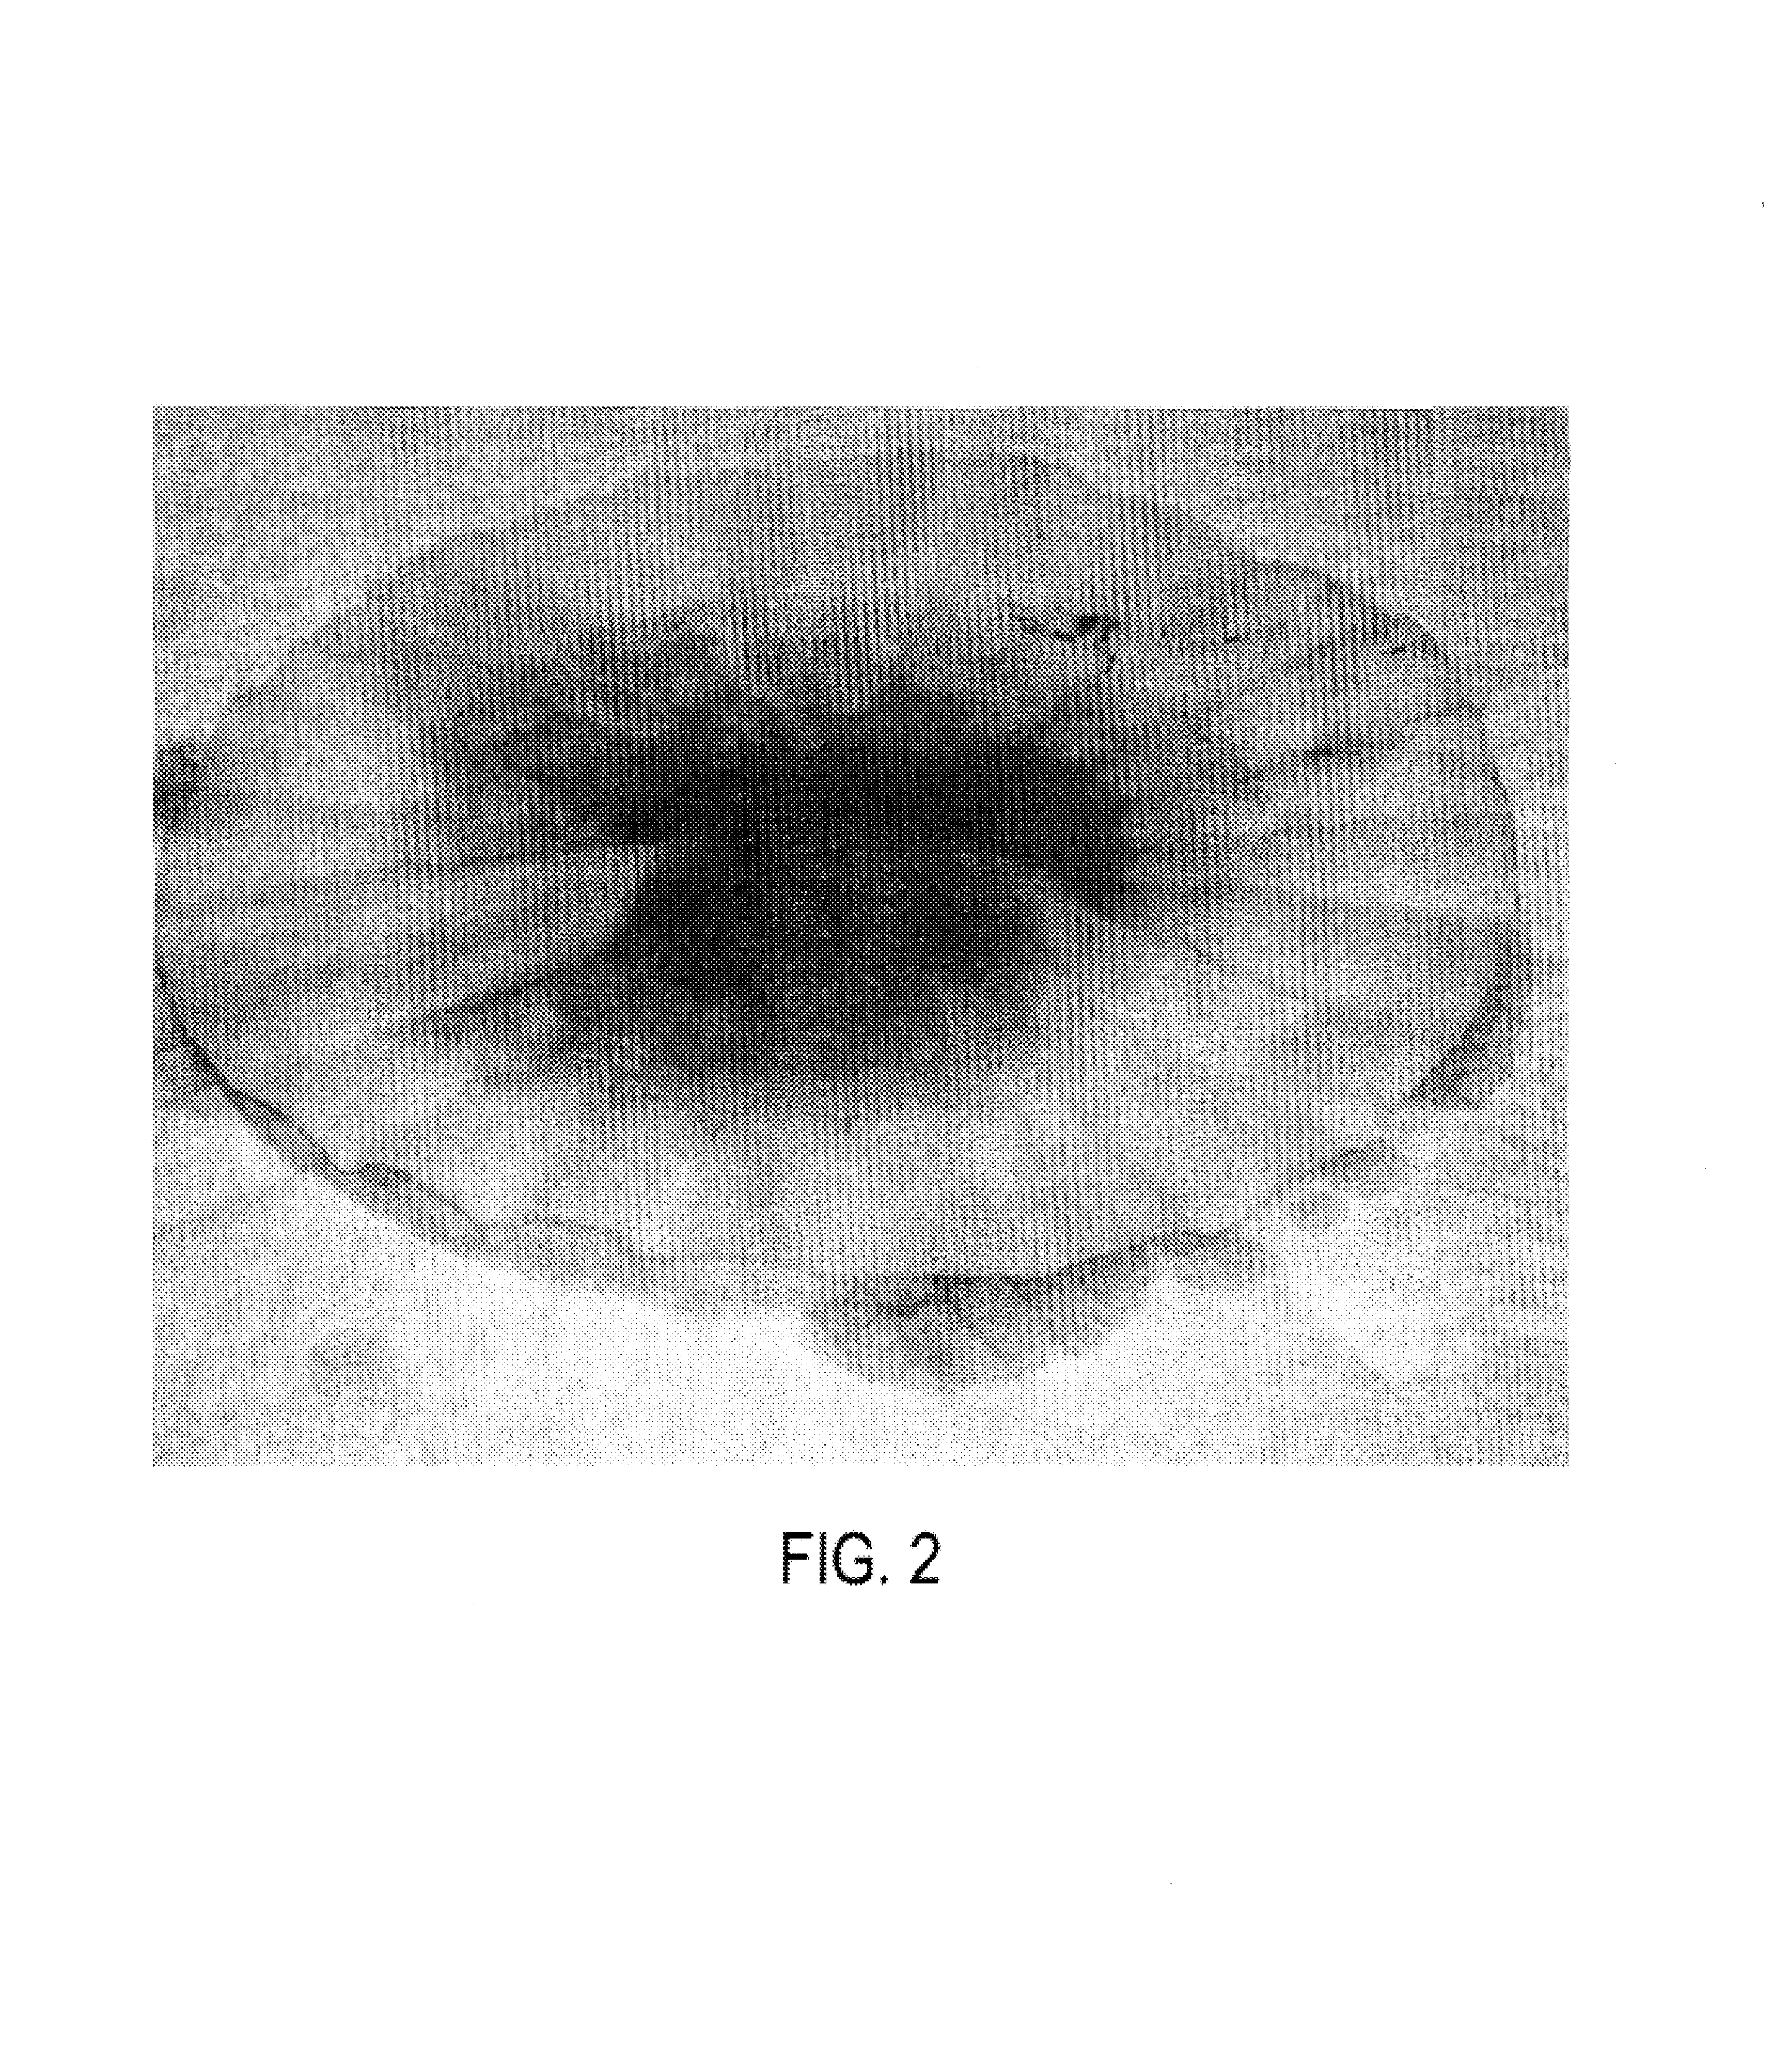 Dye solutions for use in methods to detect the prior evaporation of anhydrous ammonia and the production of illict drugs